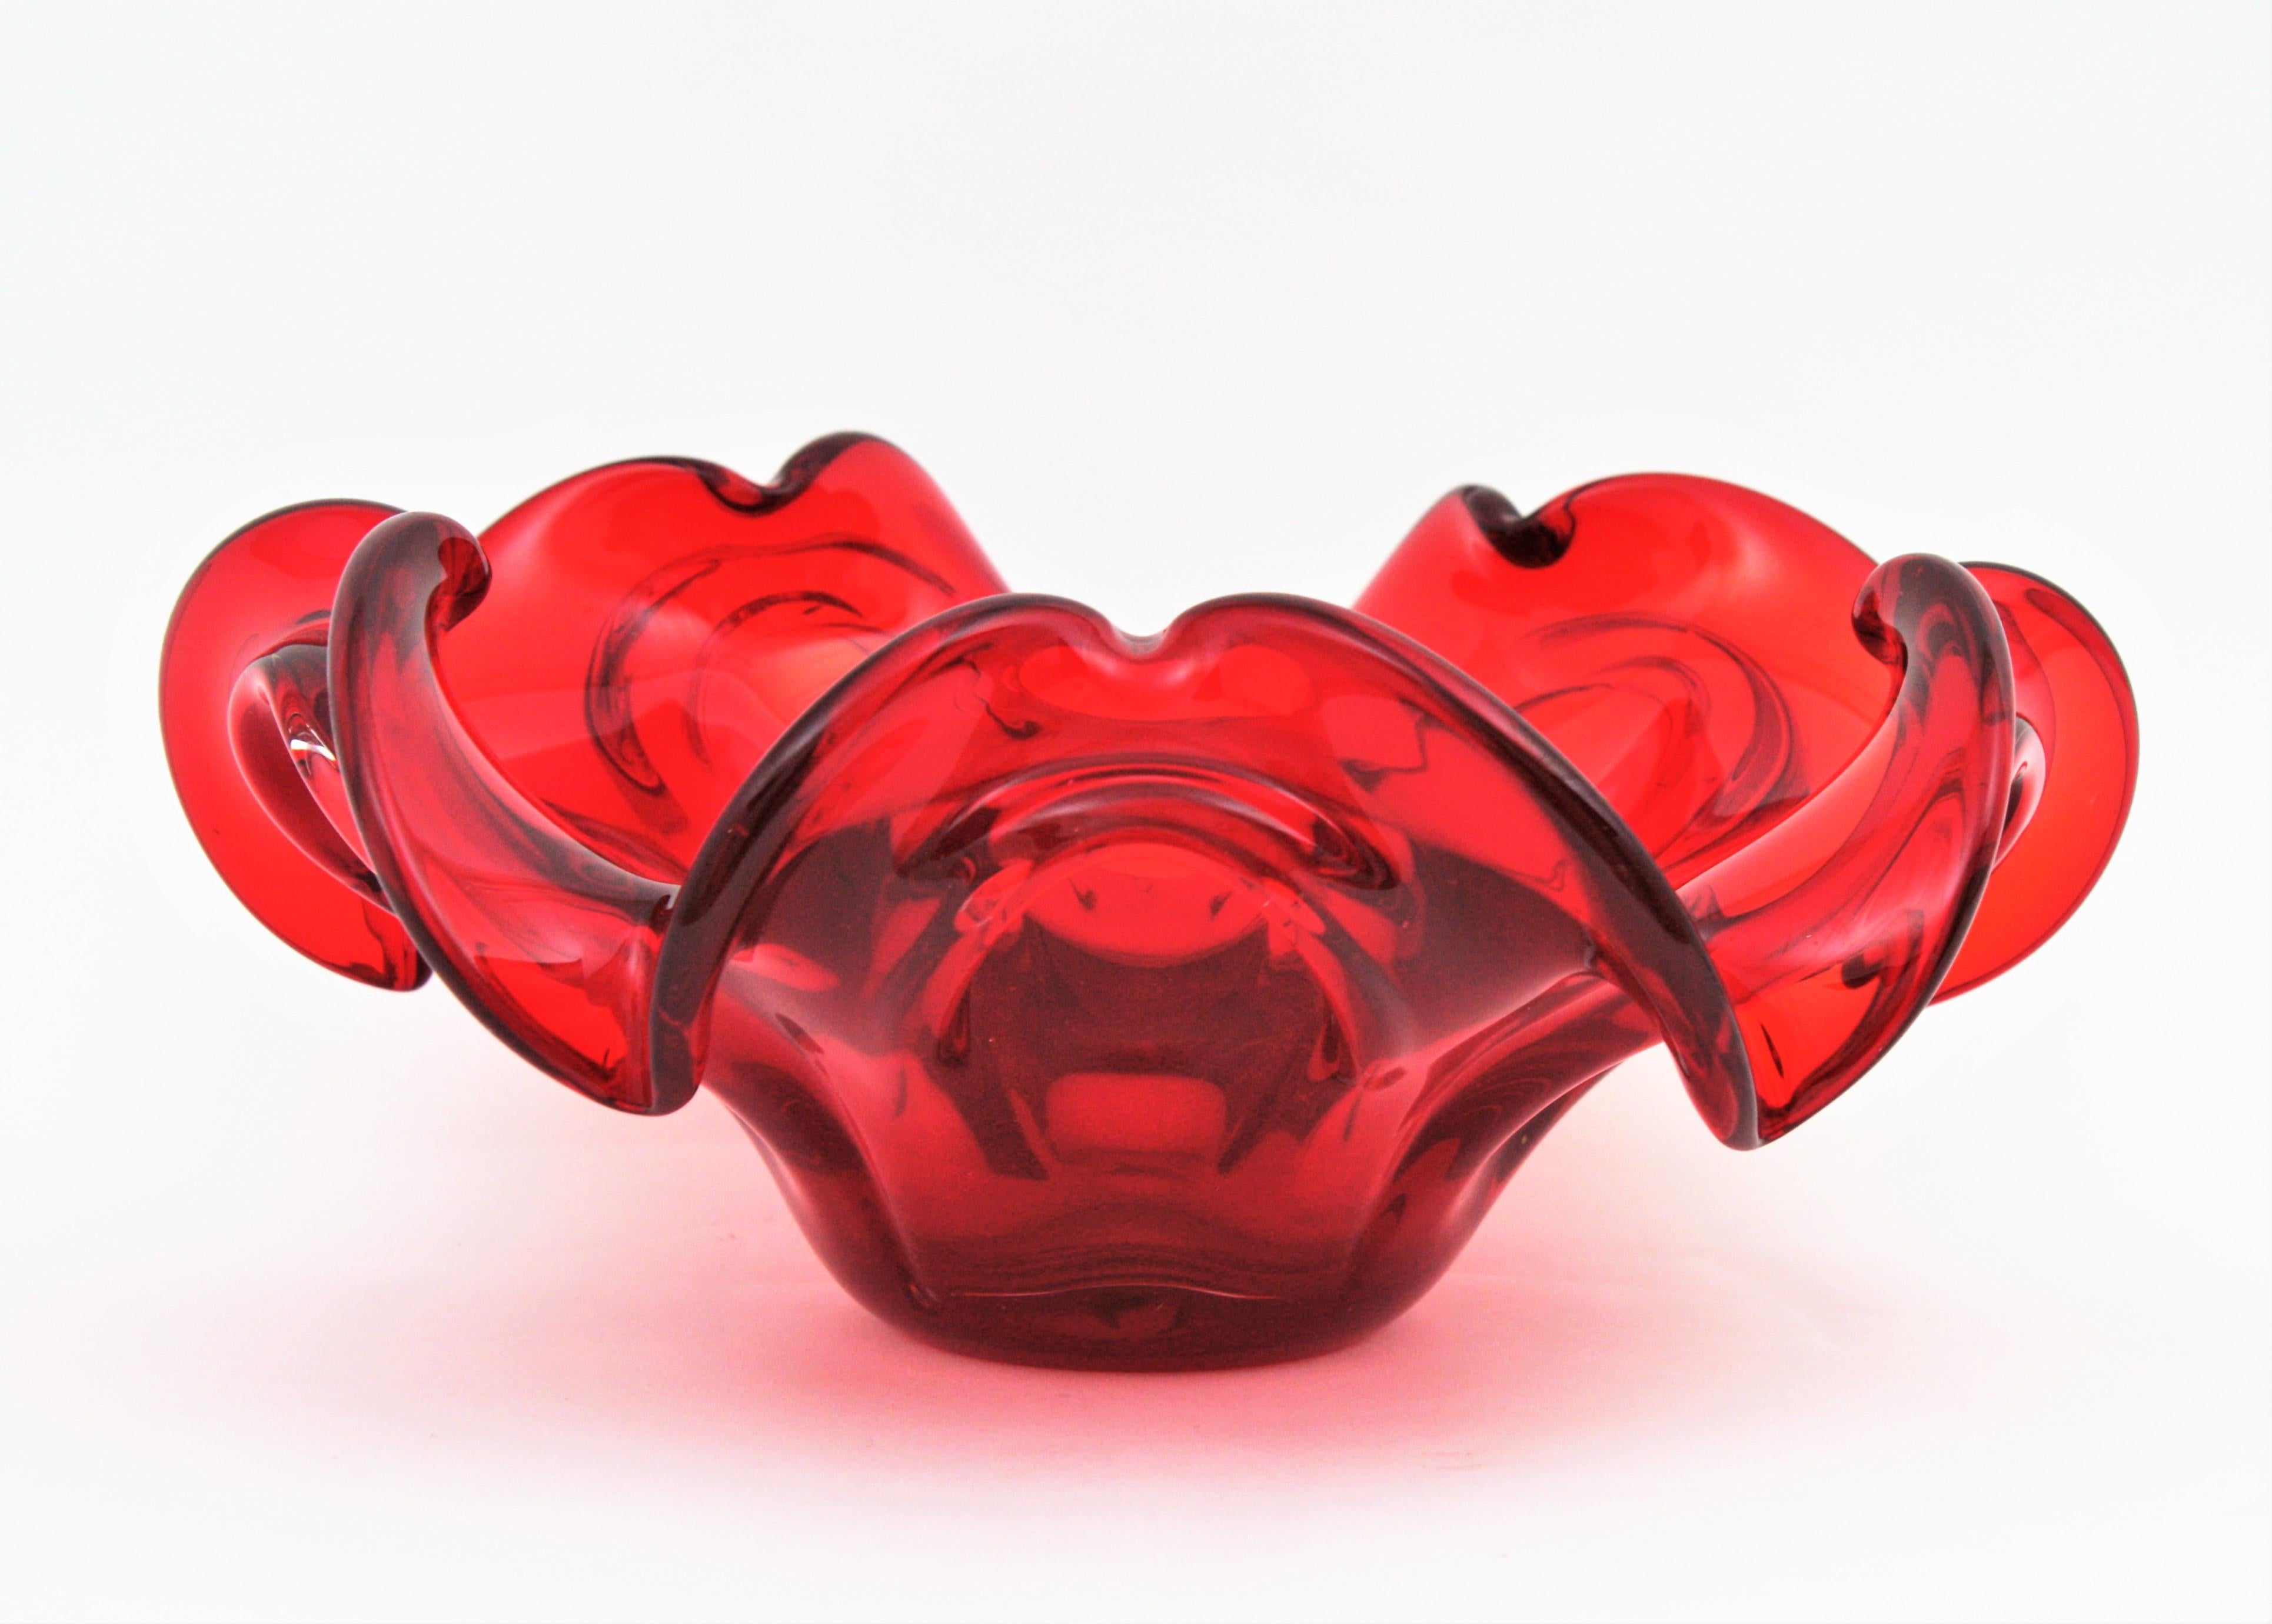 XXL Archimede Seguso Murano Ruby Red Sommerso Glass Flower Centerpiece Bowl 3